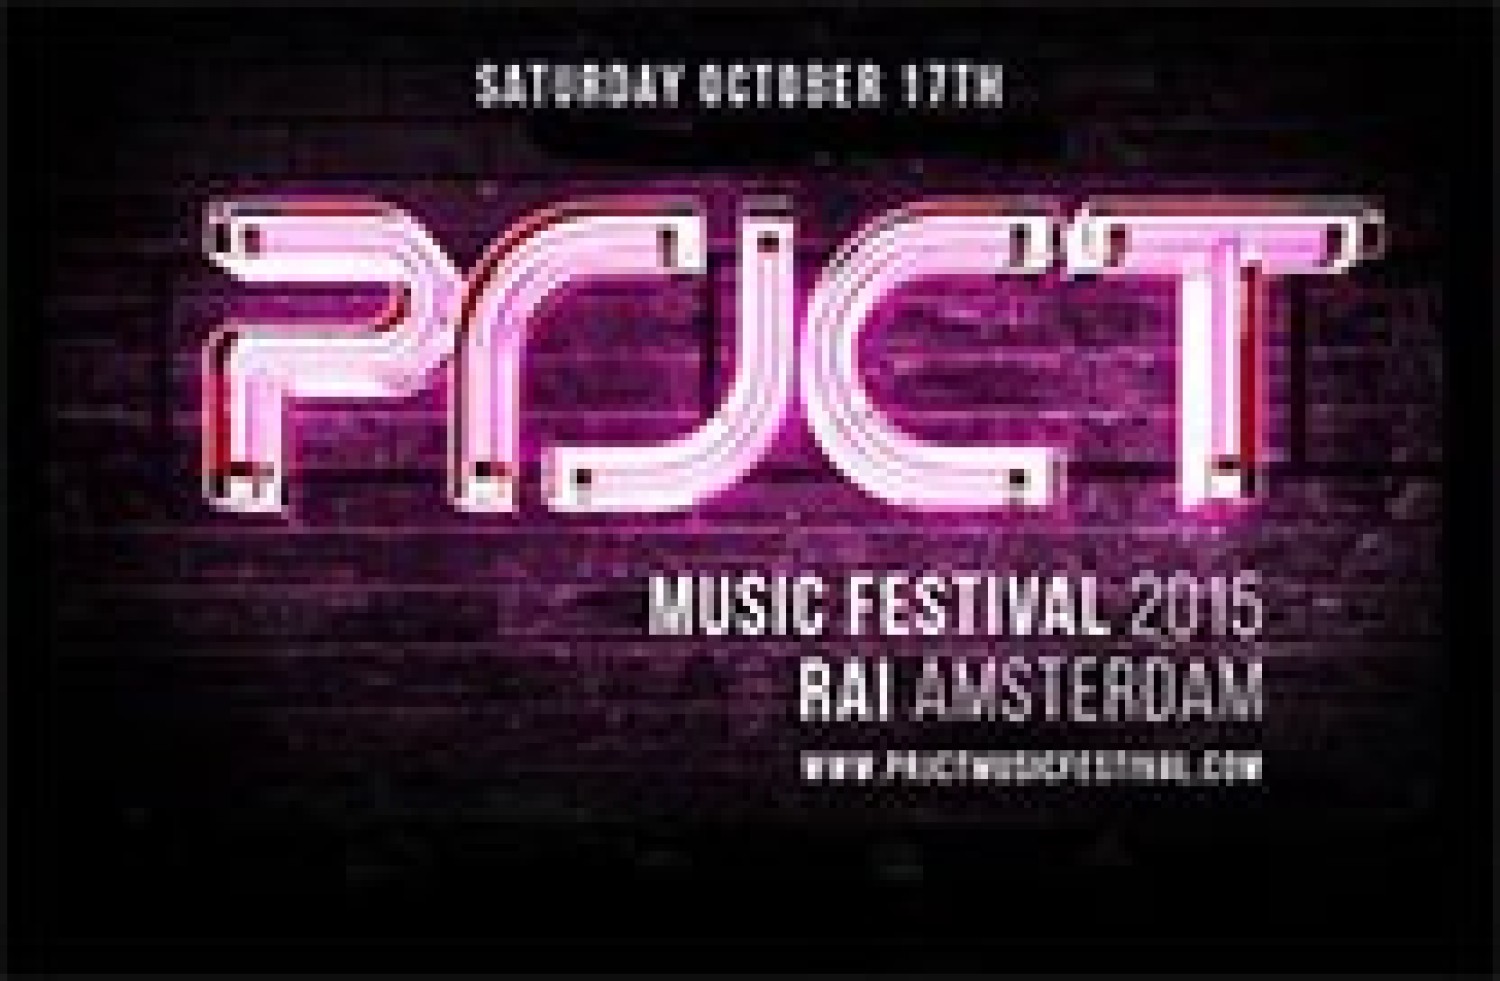 Party report: PRJCT Music Festival, Amsterdam (17-10-2015)